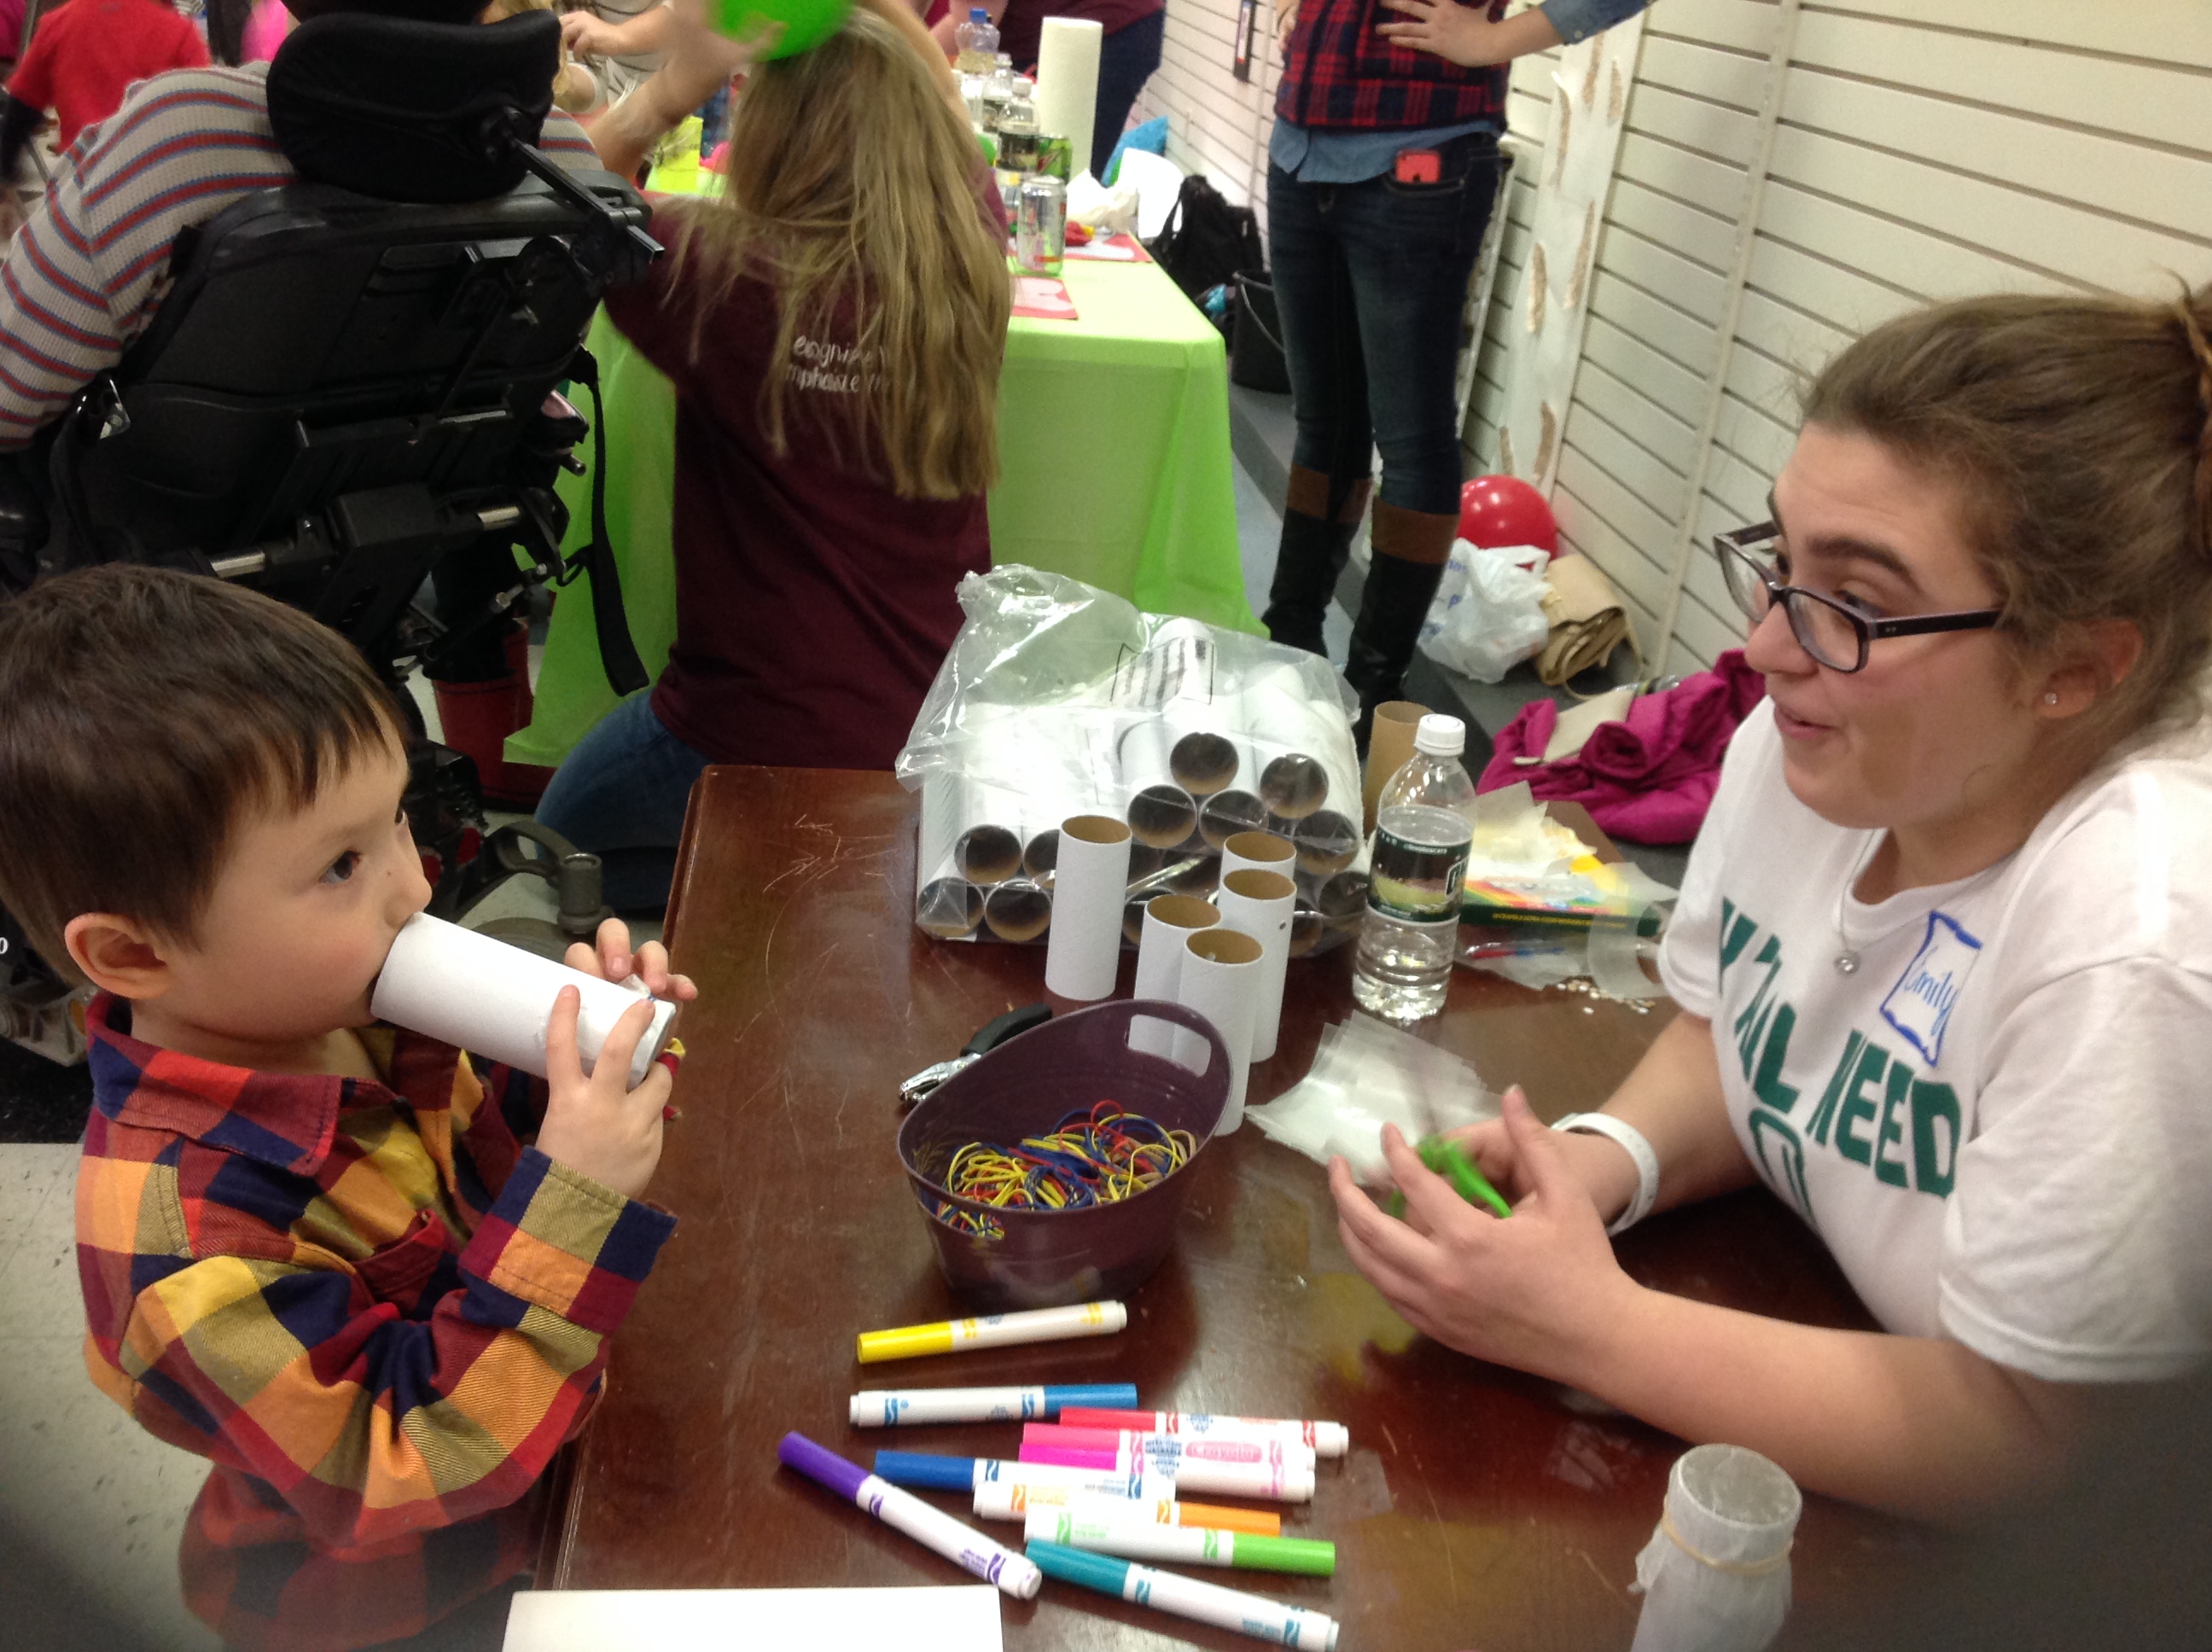 Ohio University student Emily Coen works with a child making kazoos during the Inclusive Science Day